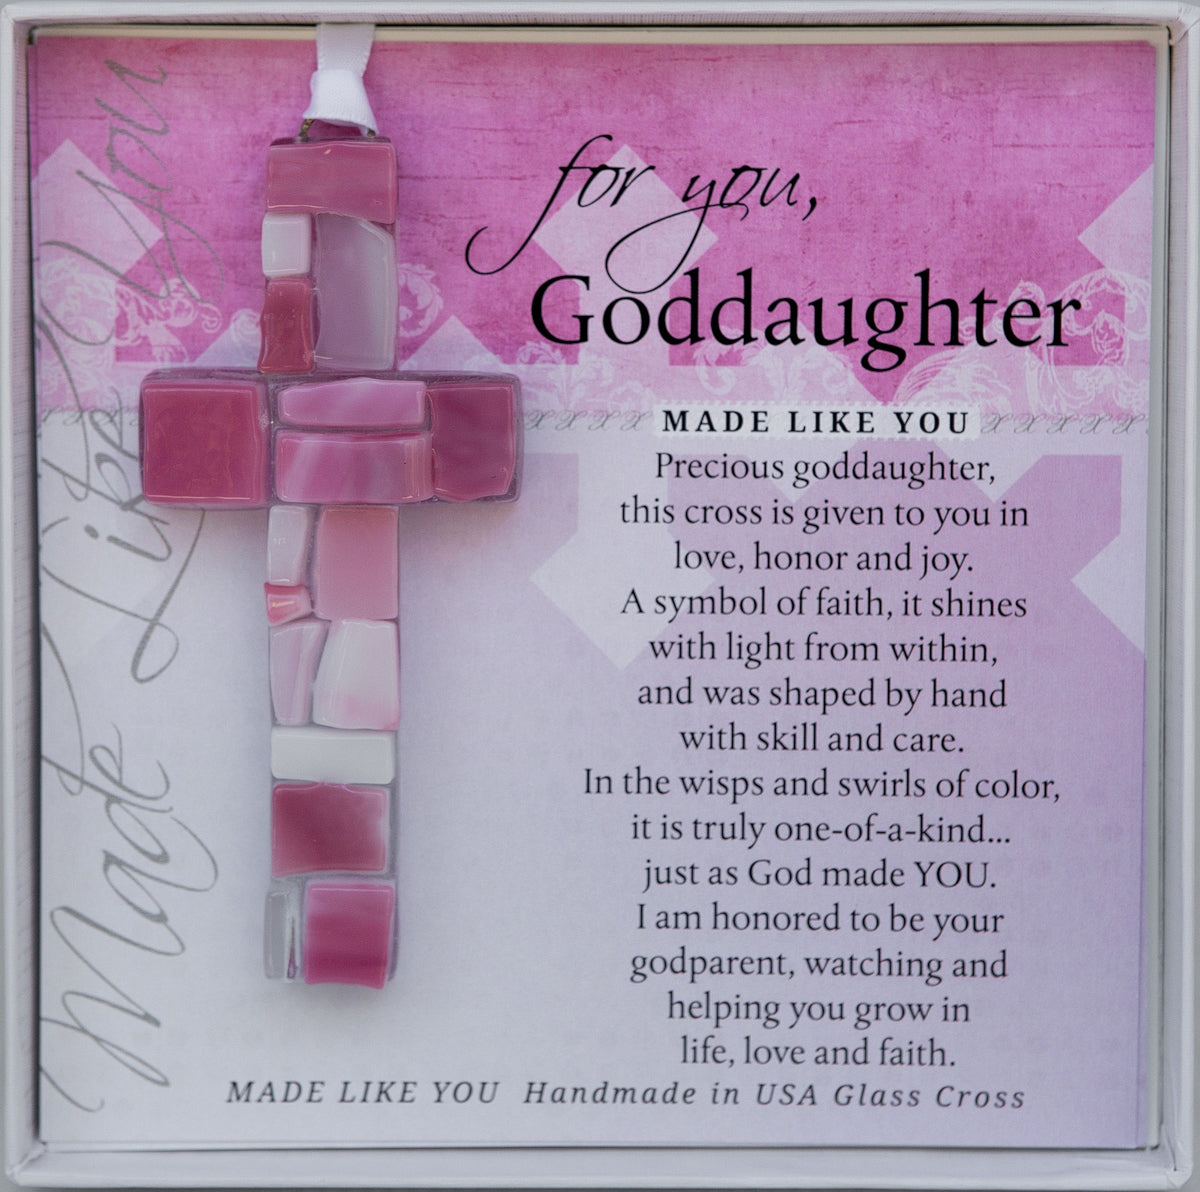 Goddaughter Gift - Handmade 4" pink mosaic glass cross and "For You, Goddaughter" sentiment in white box with clear lid.